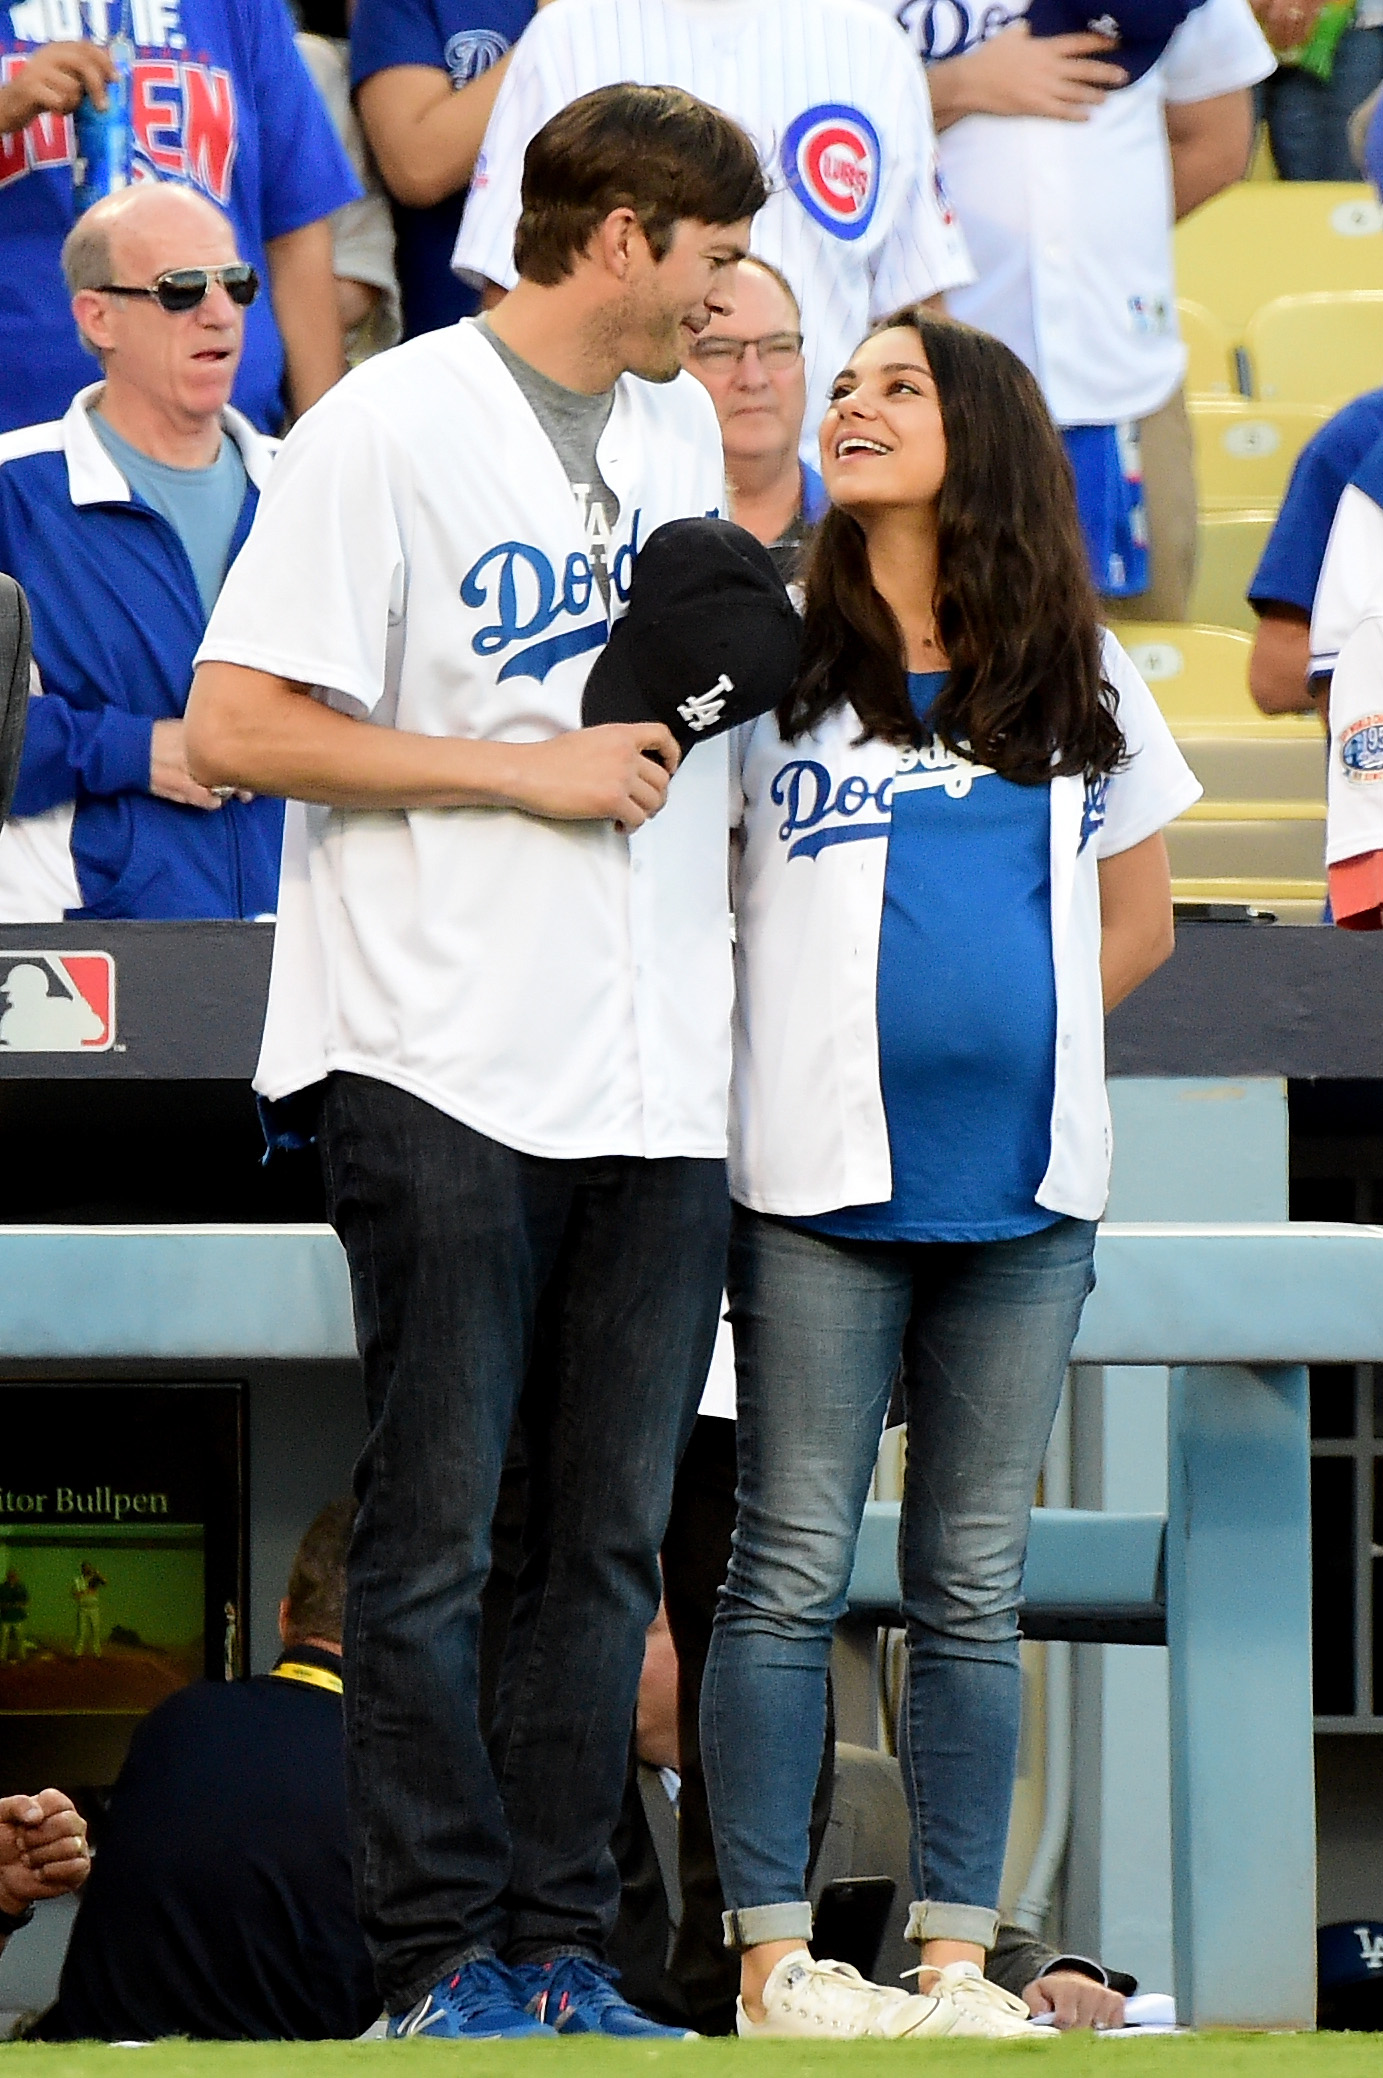 Ashton Kutcher and Mila Kunis on the field after they announced the Los Angeles Dodgers starting lineup before game four of the National League Championship Series against the Chicago Cubs at Dodger Stadium, on October 19, 2016, in Los Angeles, California. | Source: Getty Images